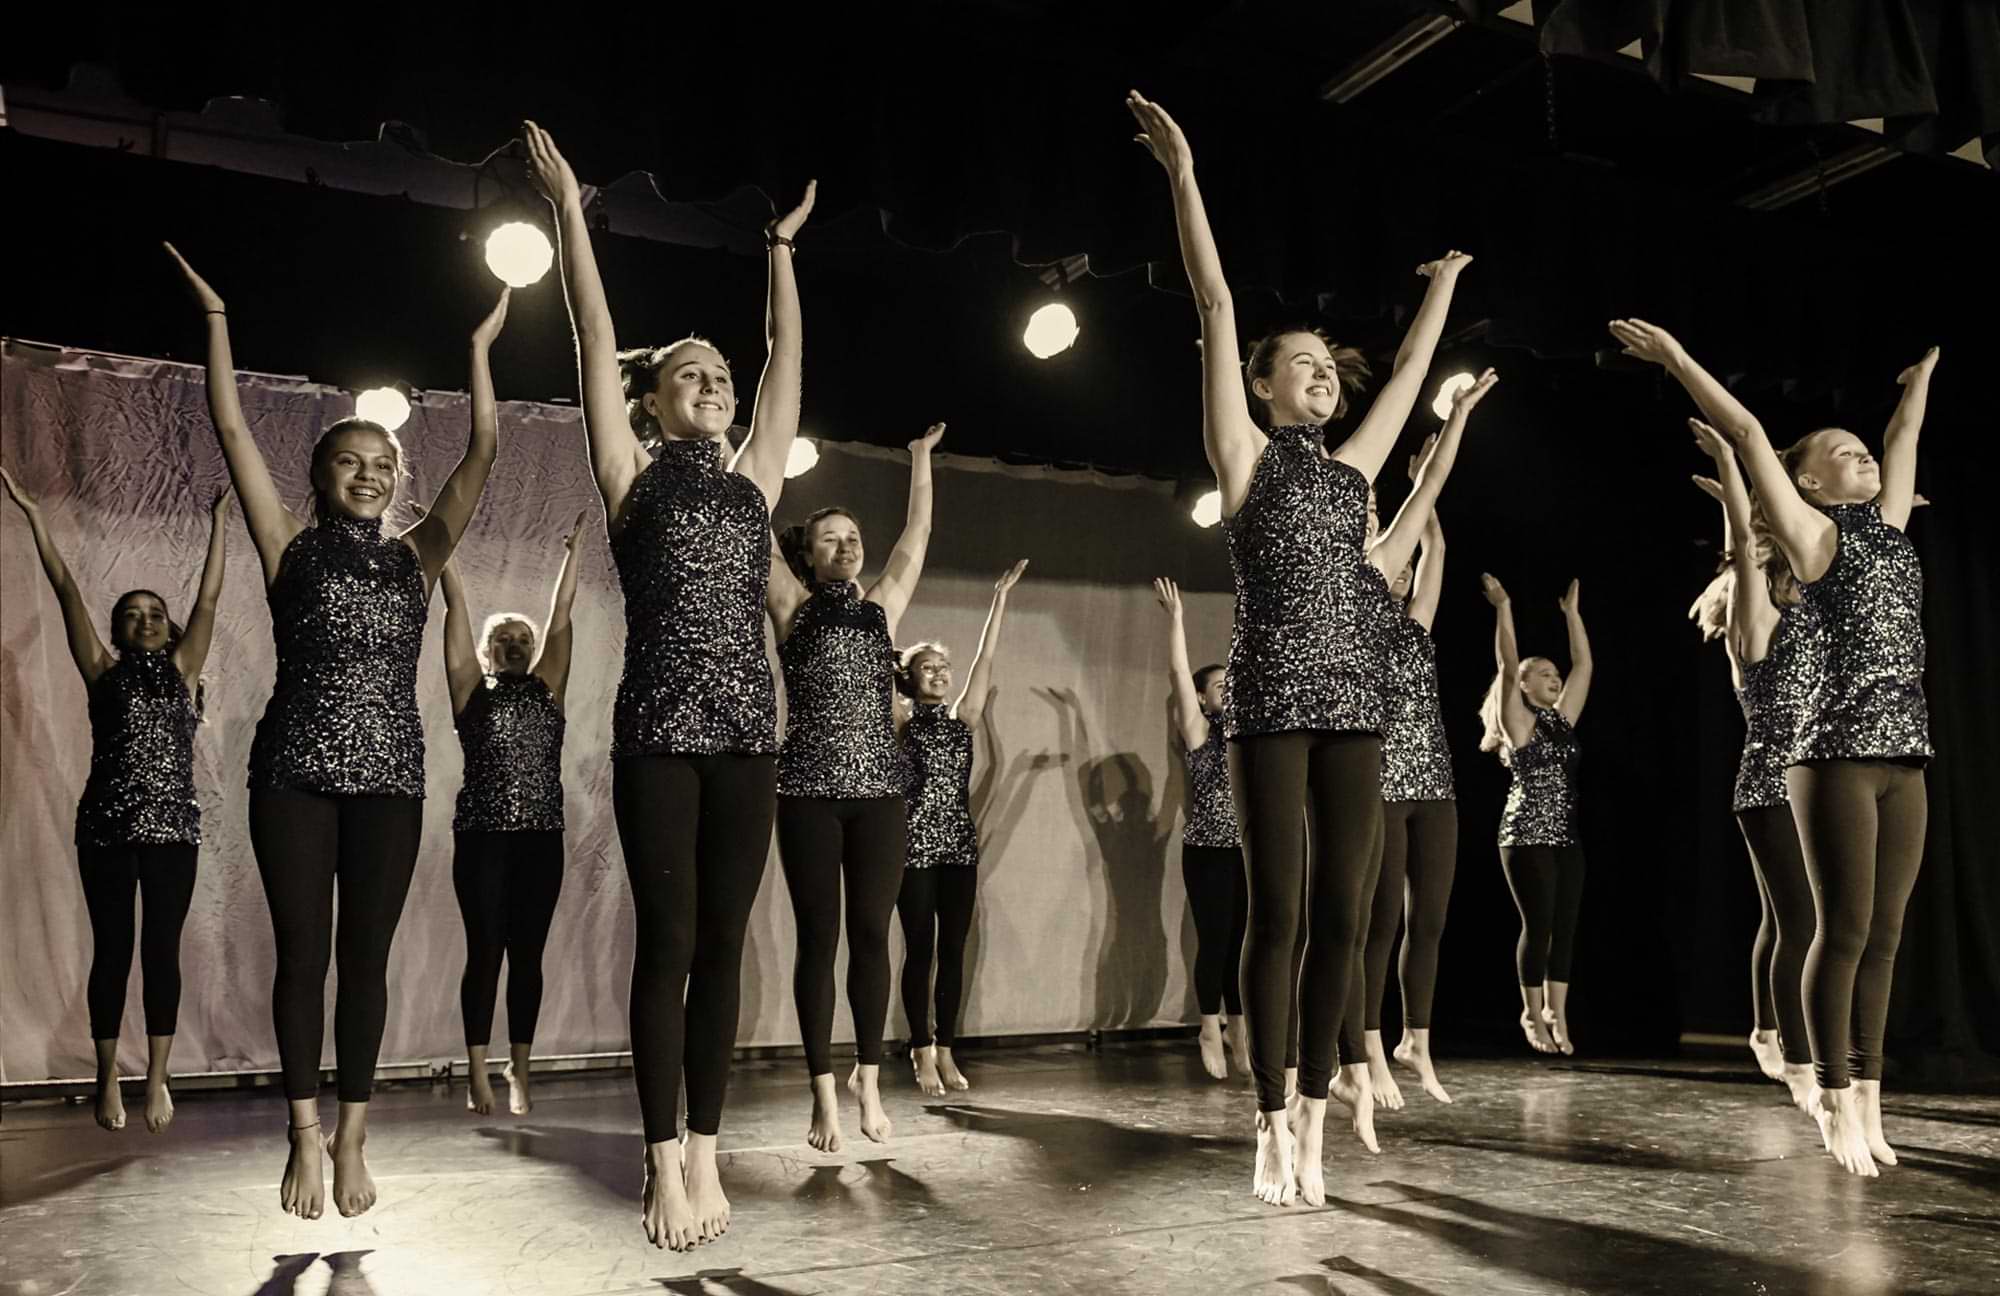 members of the Nordhoff High School Dance Program on stage performing